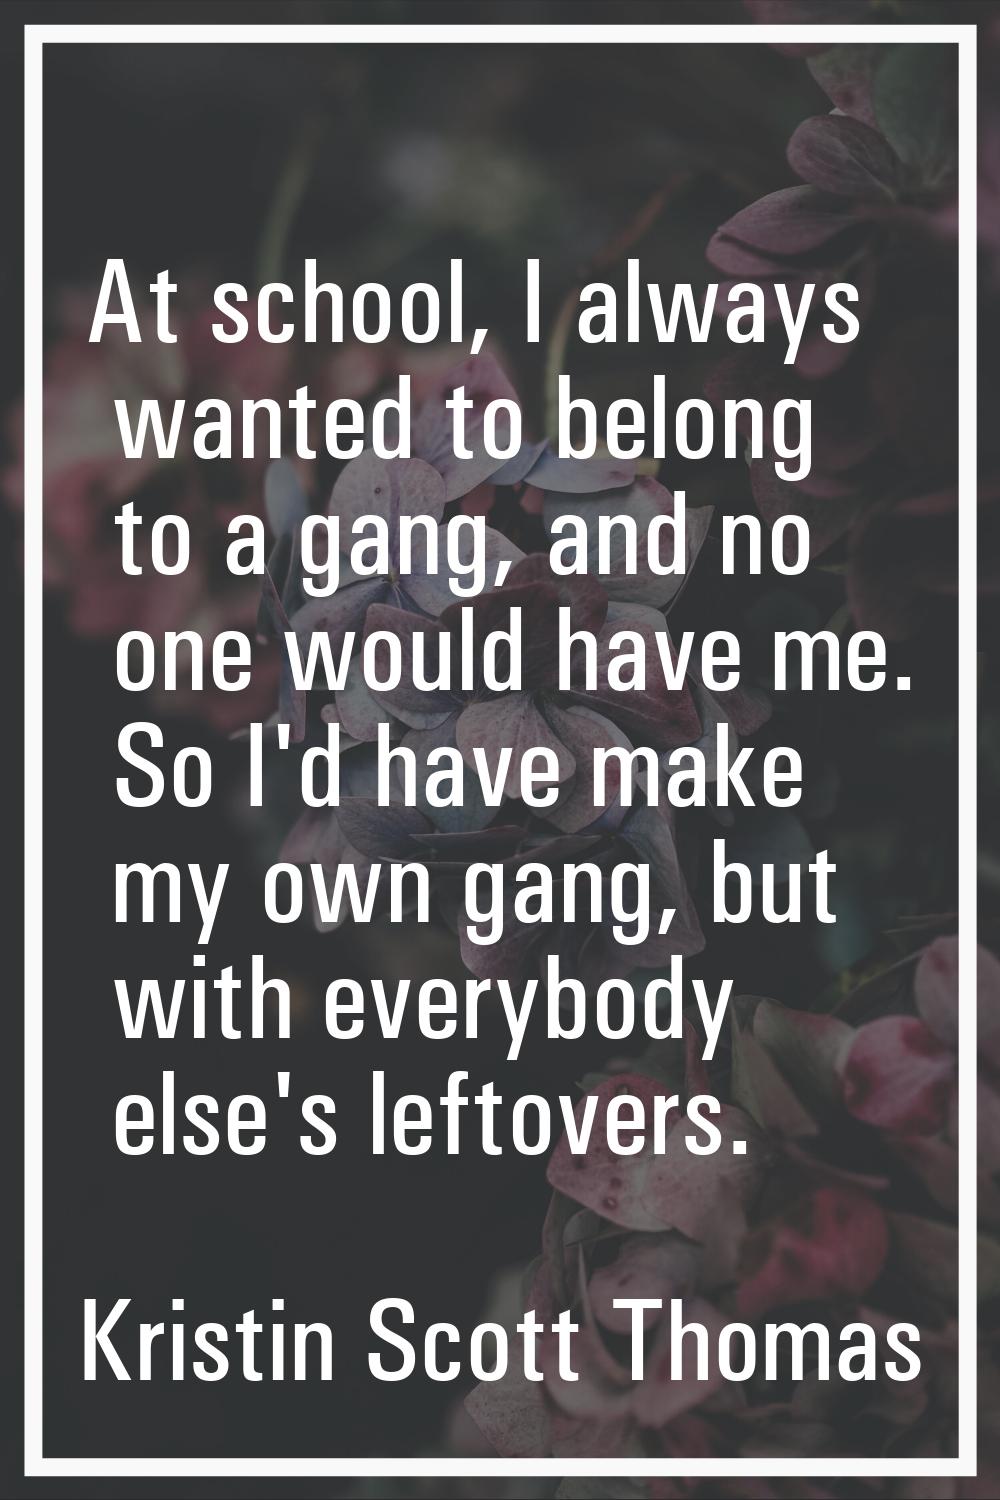 At school, I always wanted to belong to a gang, and no one would have me. So I'd have make my own g